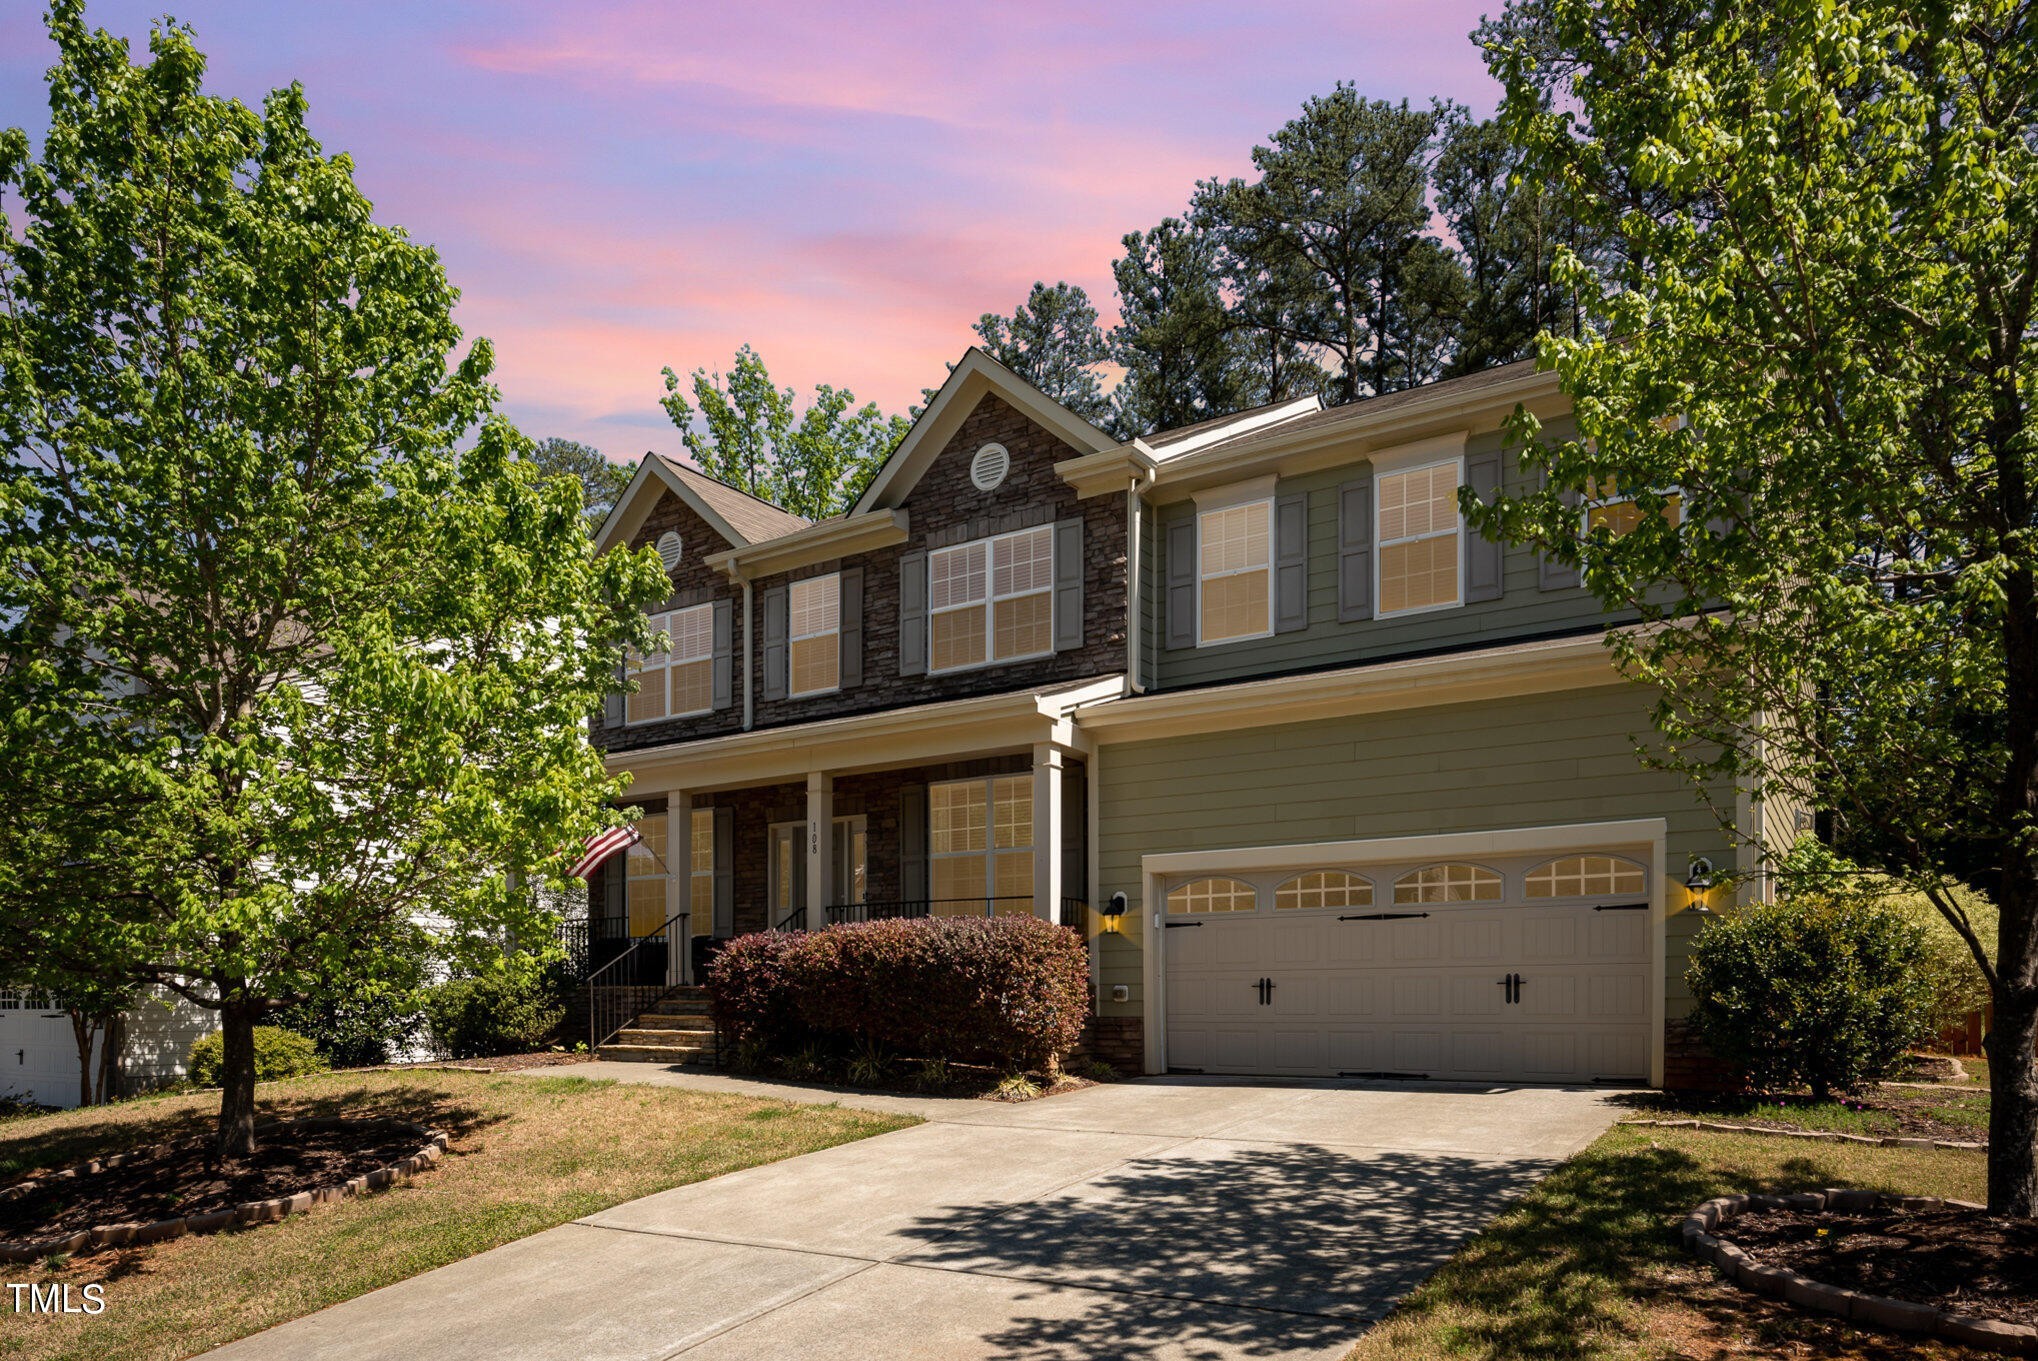 1. 108 Ulverston Drive, Holly Springs Nc 27540